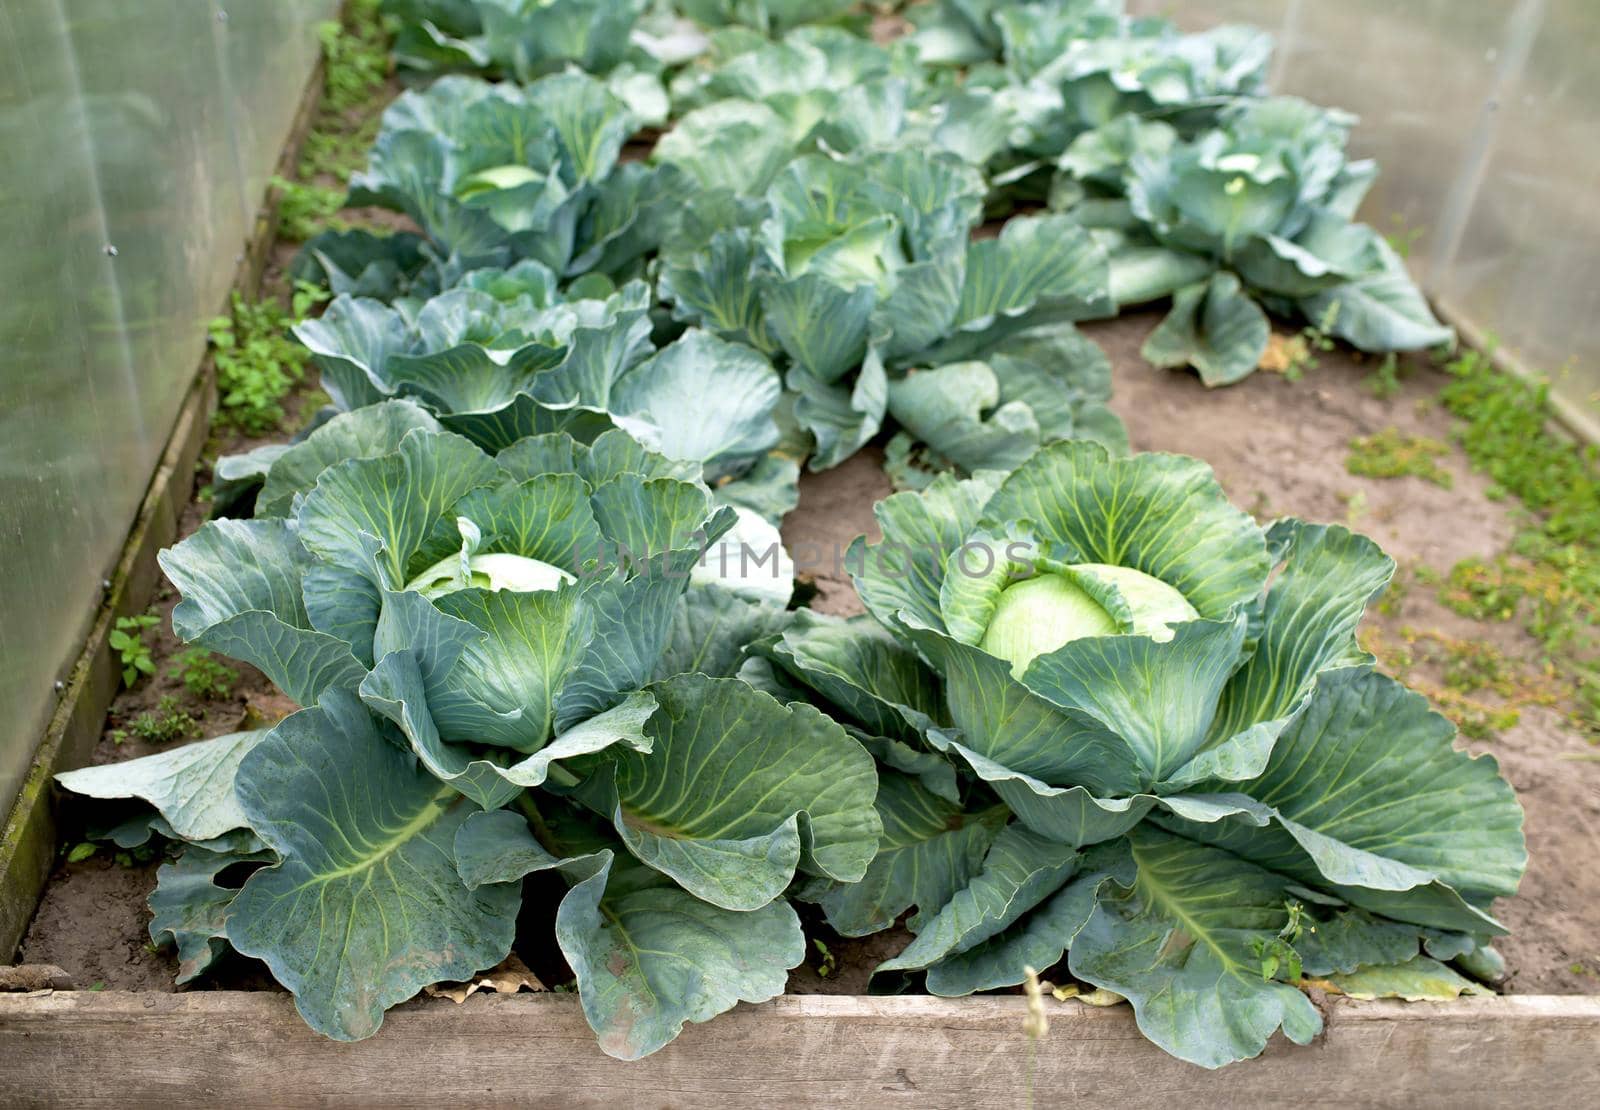 green cabbage plant field outdoor in summer agriculture vegetables.